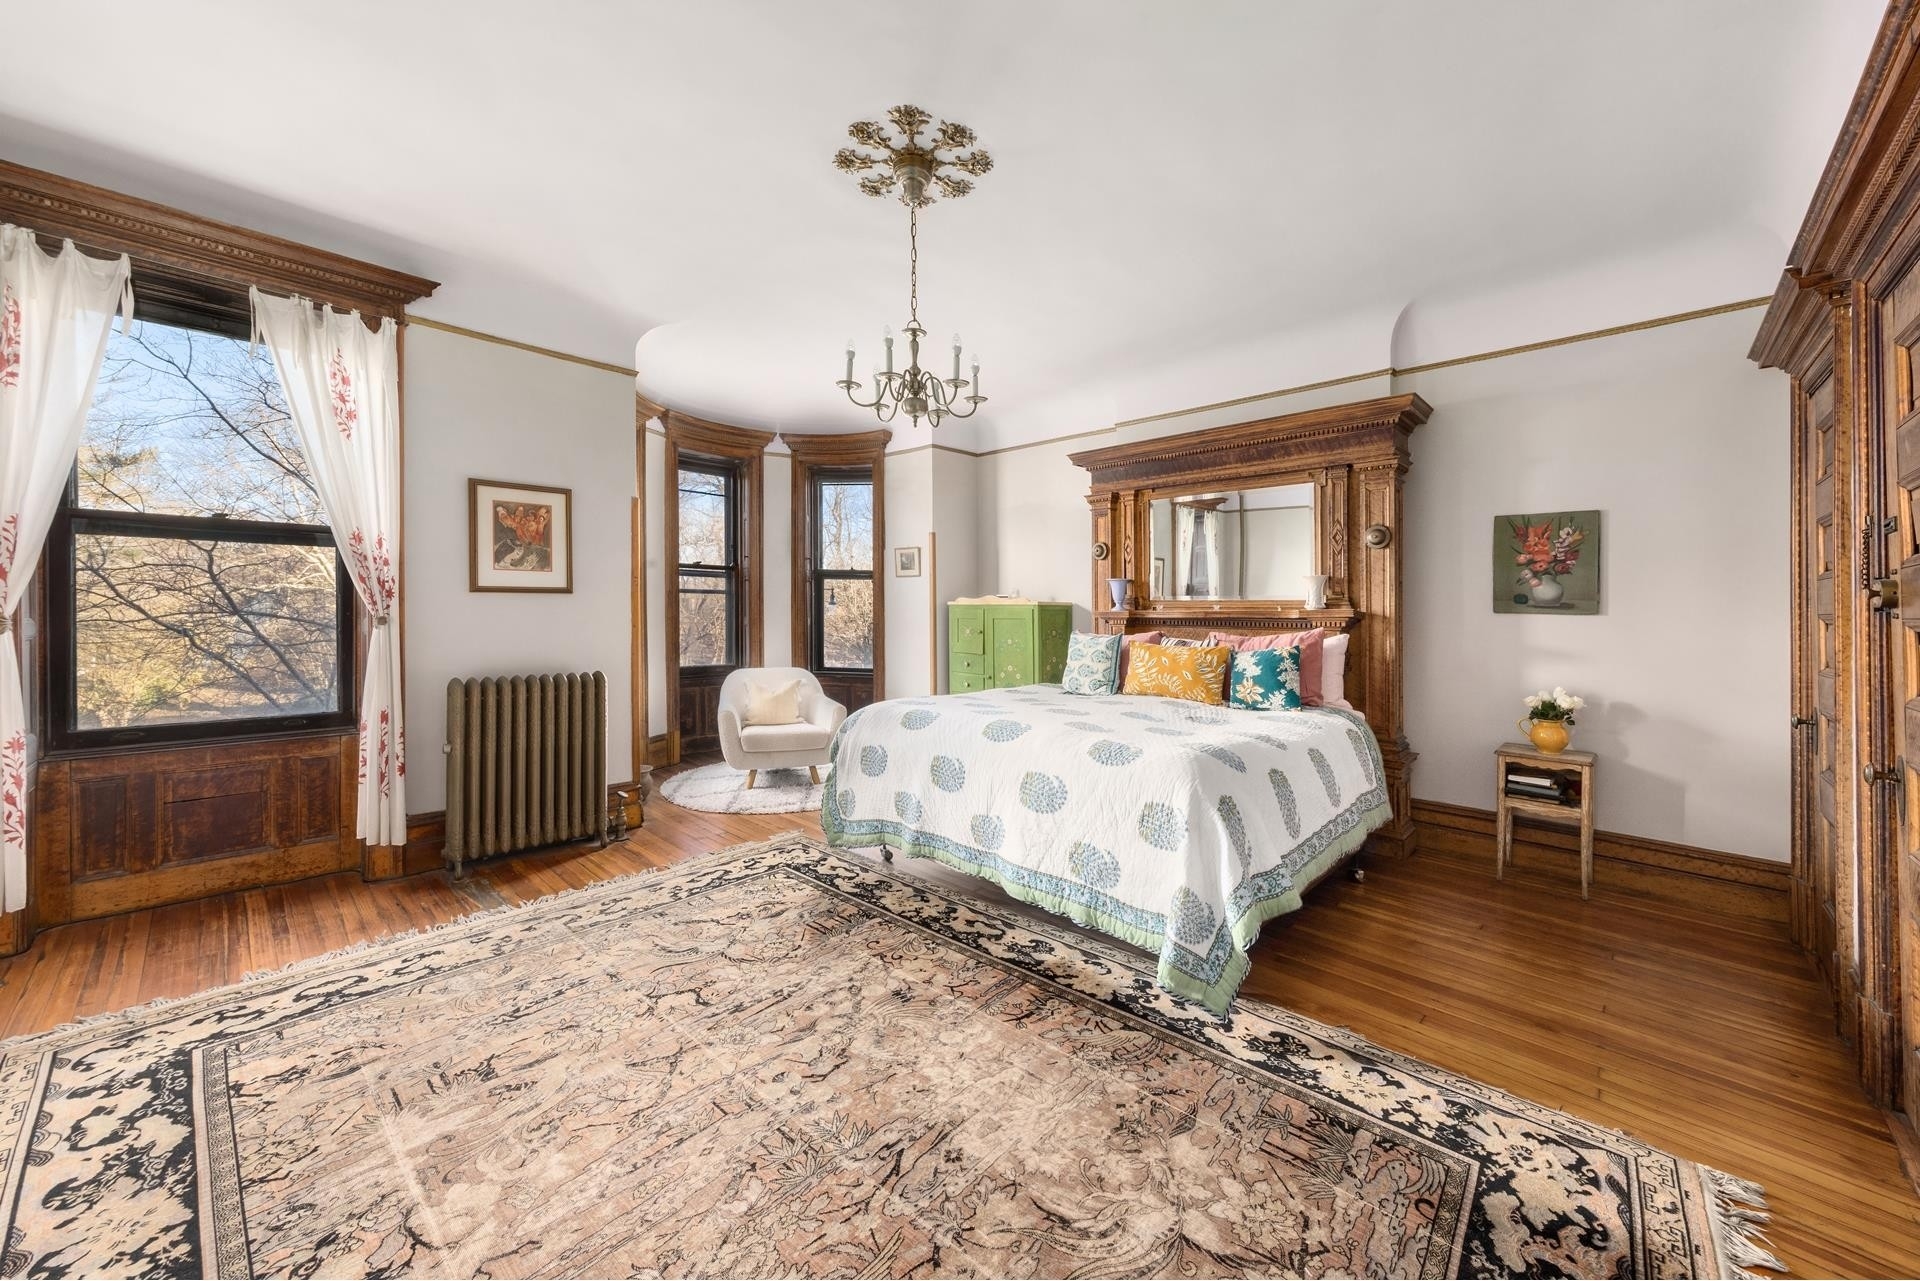 8. Co-op Properties for Sale at 120 PROSPECT PARK W, 2 Park Slope, Brooklyn, New York 11215